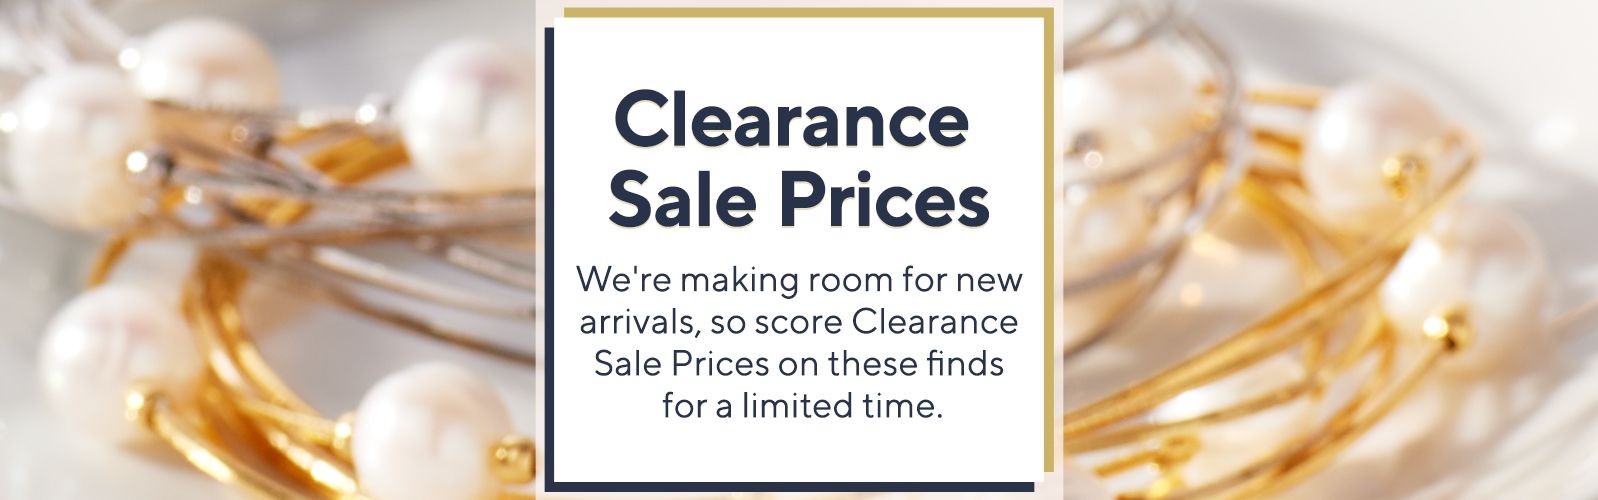 Clearance Sale Prices.  We're making room for new arrivals, so score Clearance Sale Prices on these finds for a limited time.